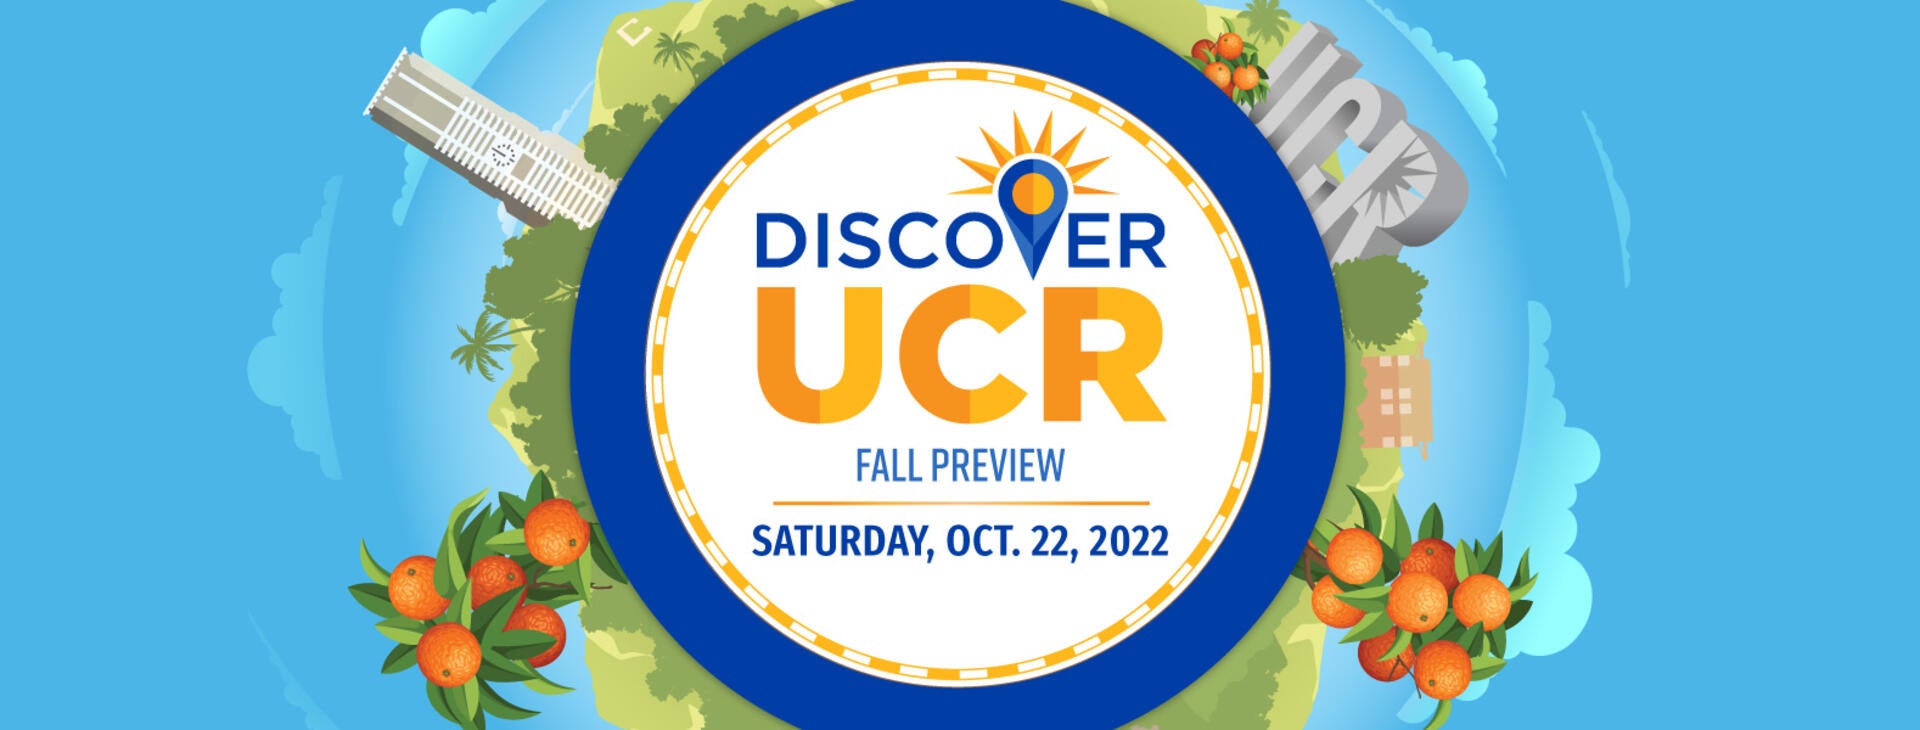 Image promoting Discover UCR:Fall Preview event